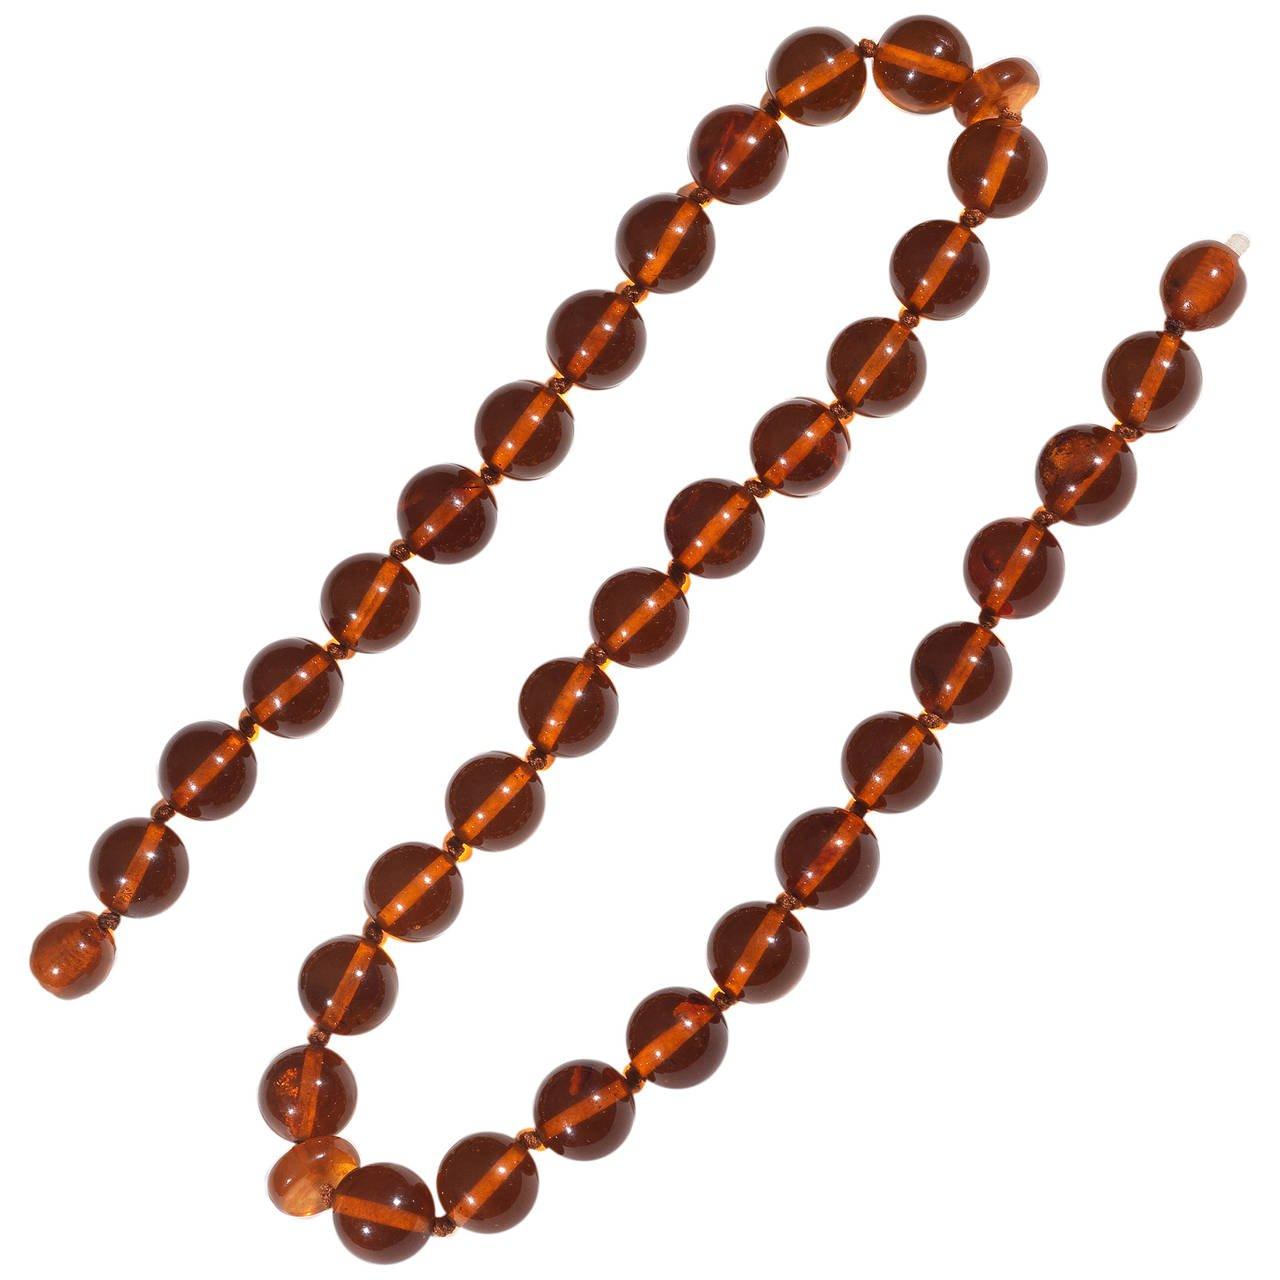 The single-strand of round amber beads approx. 14 mm diameter
Two beads with internal screw locking.

Length 56 cm.

Total weight: 51.7 gr